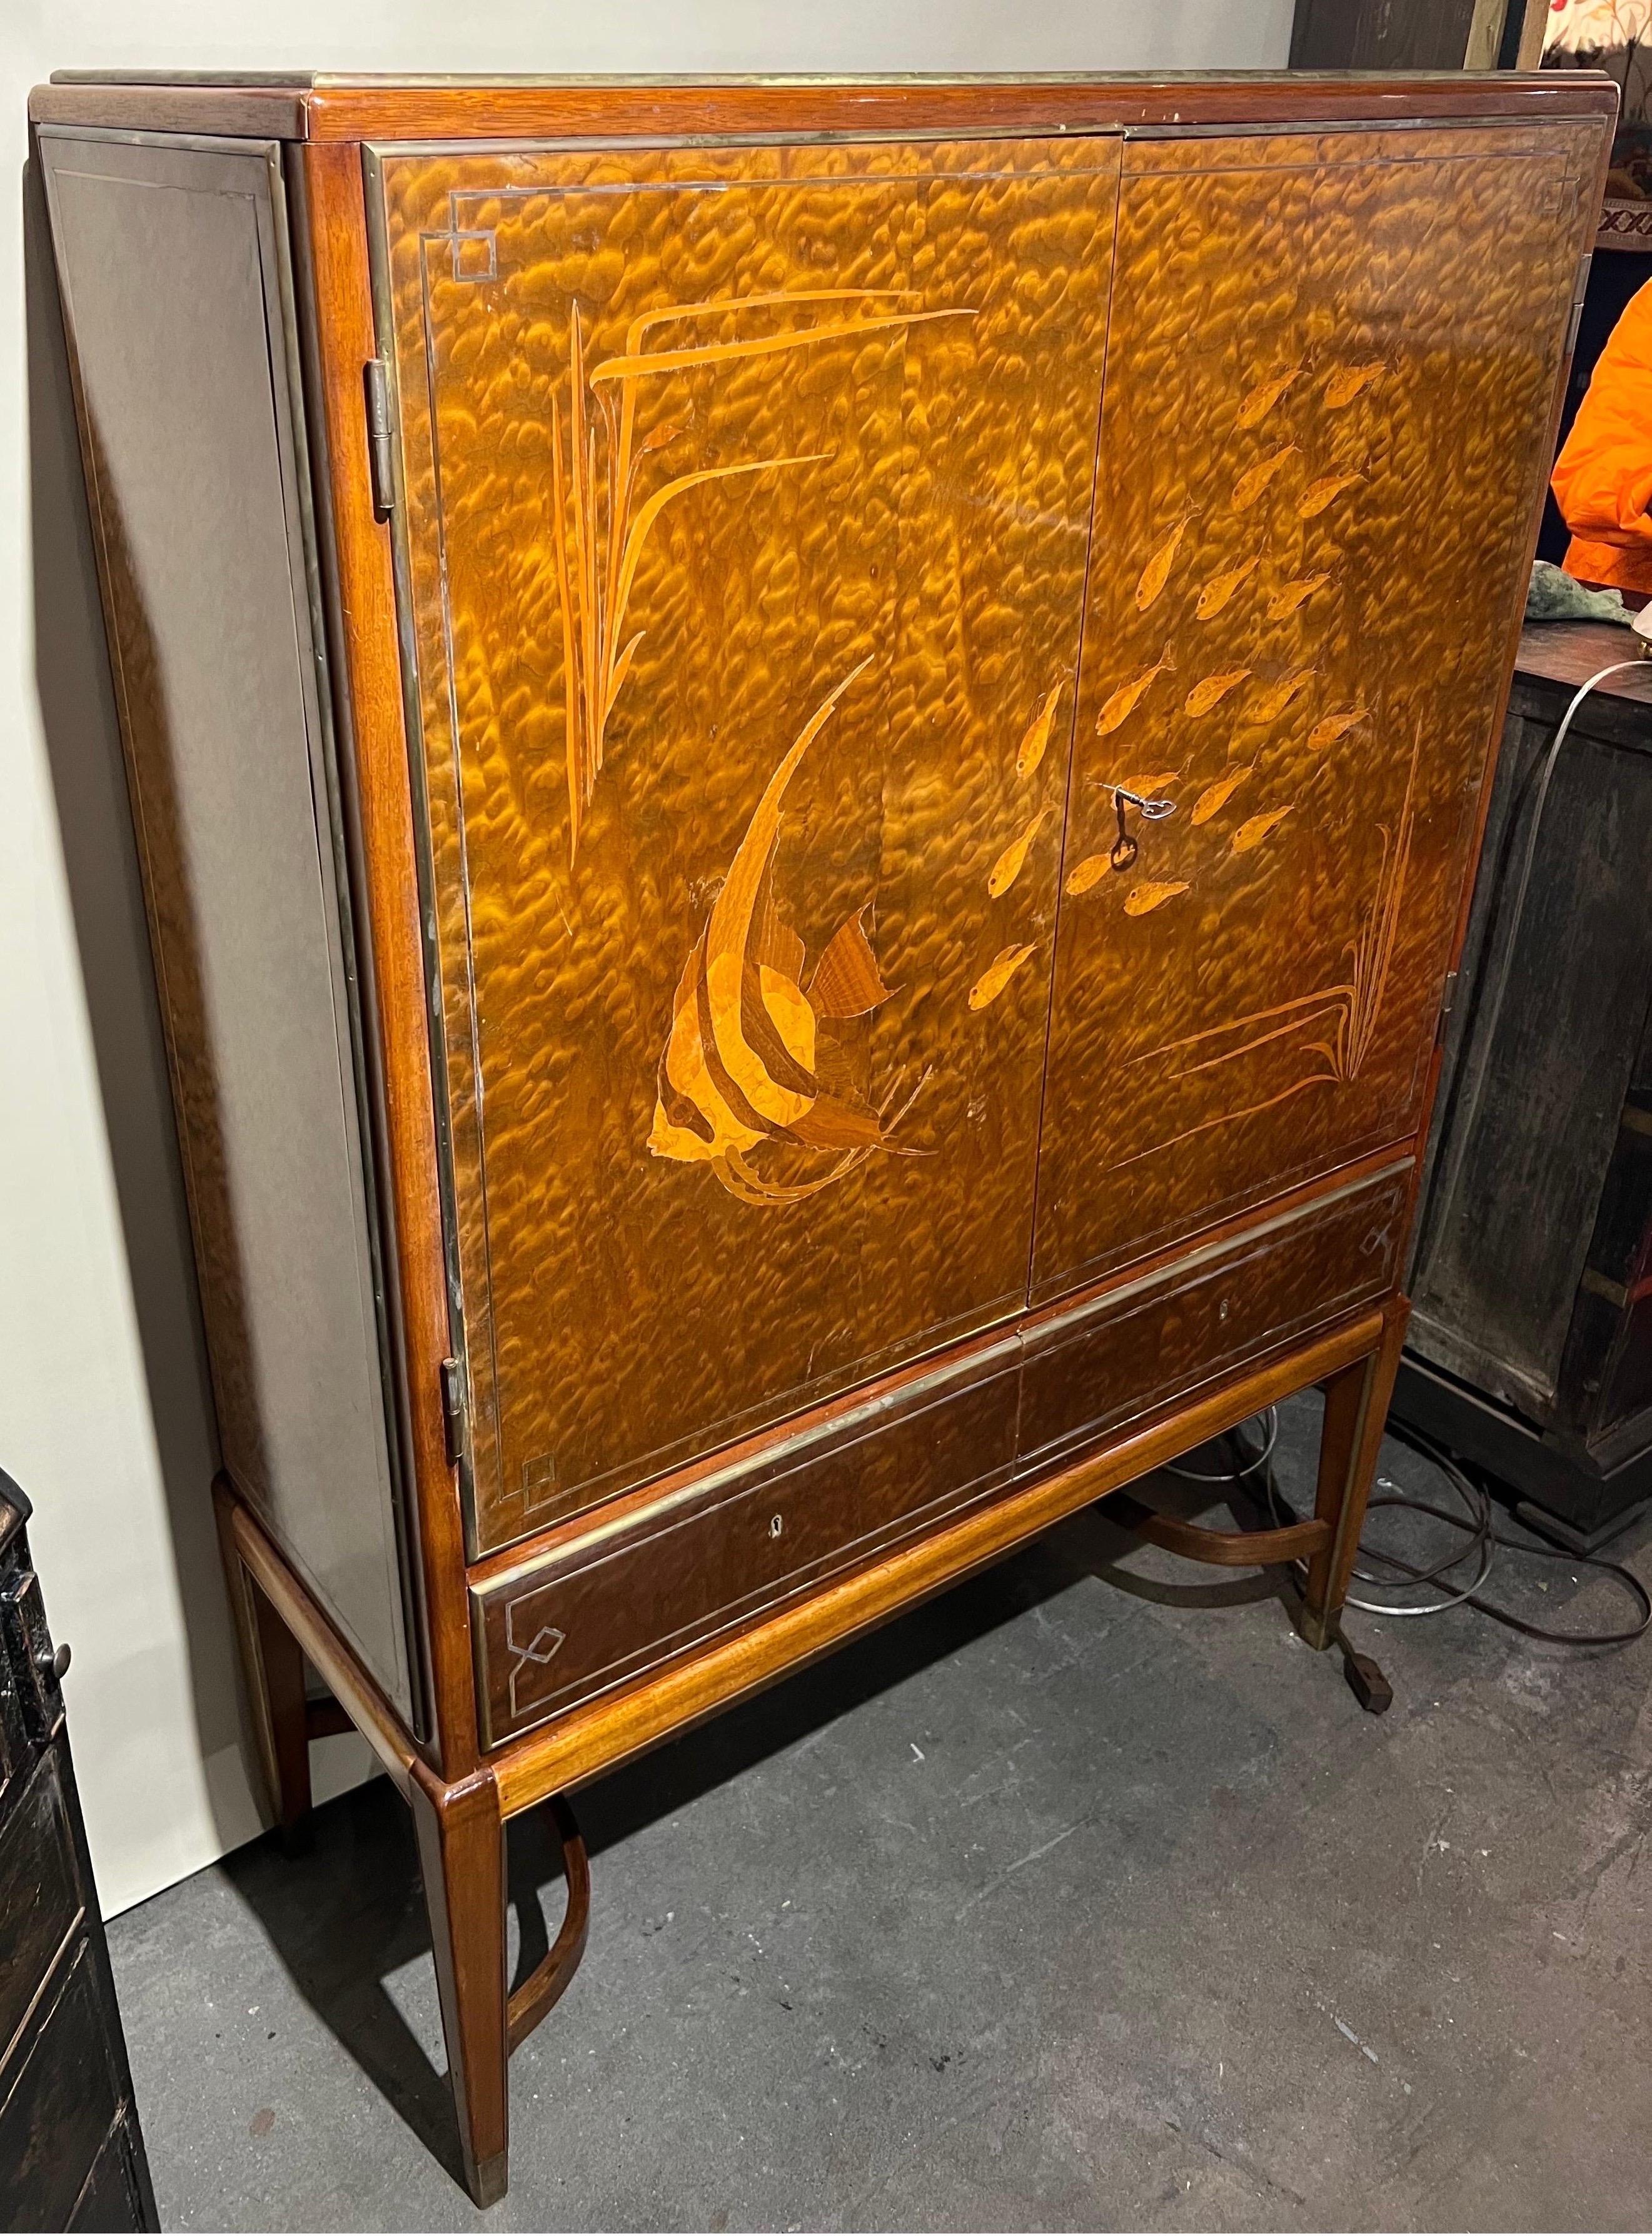 Spectacular French Art Deco Brass Mounted Fish Inlaid Bar Cabinet with Drawers For Sale 1